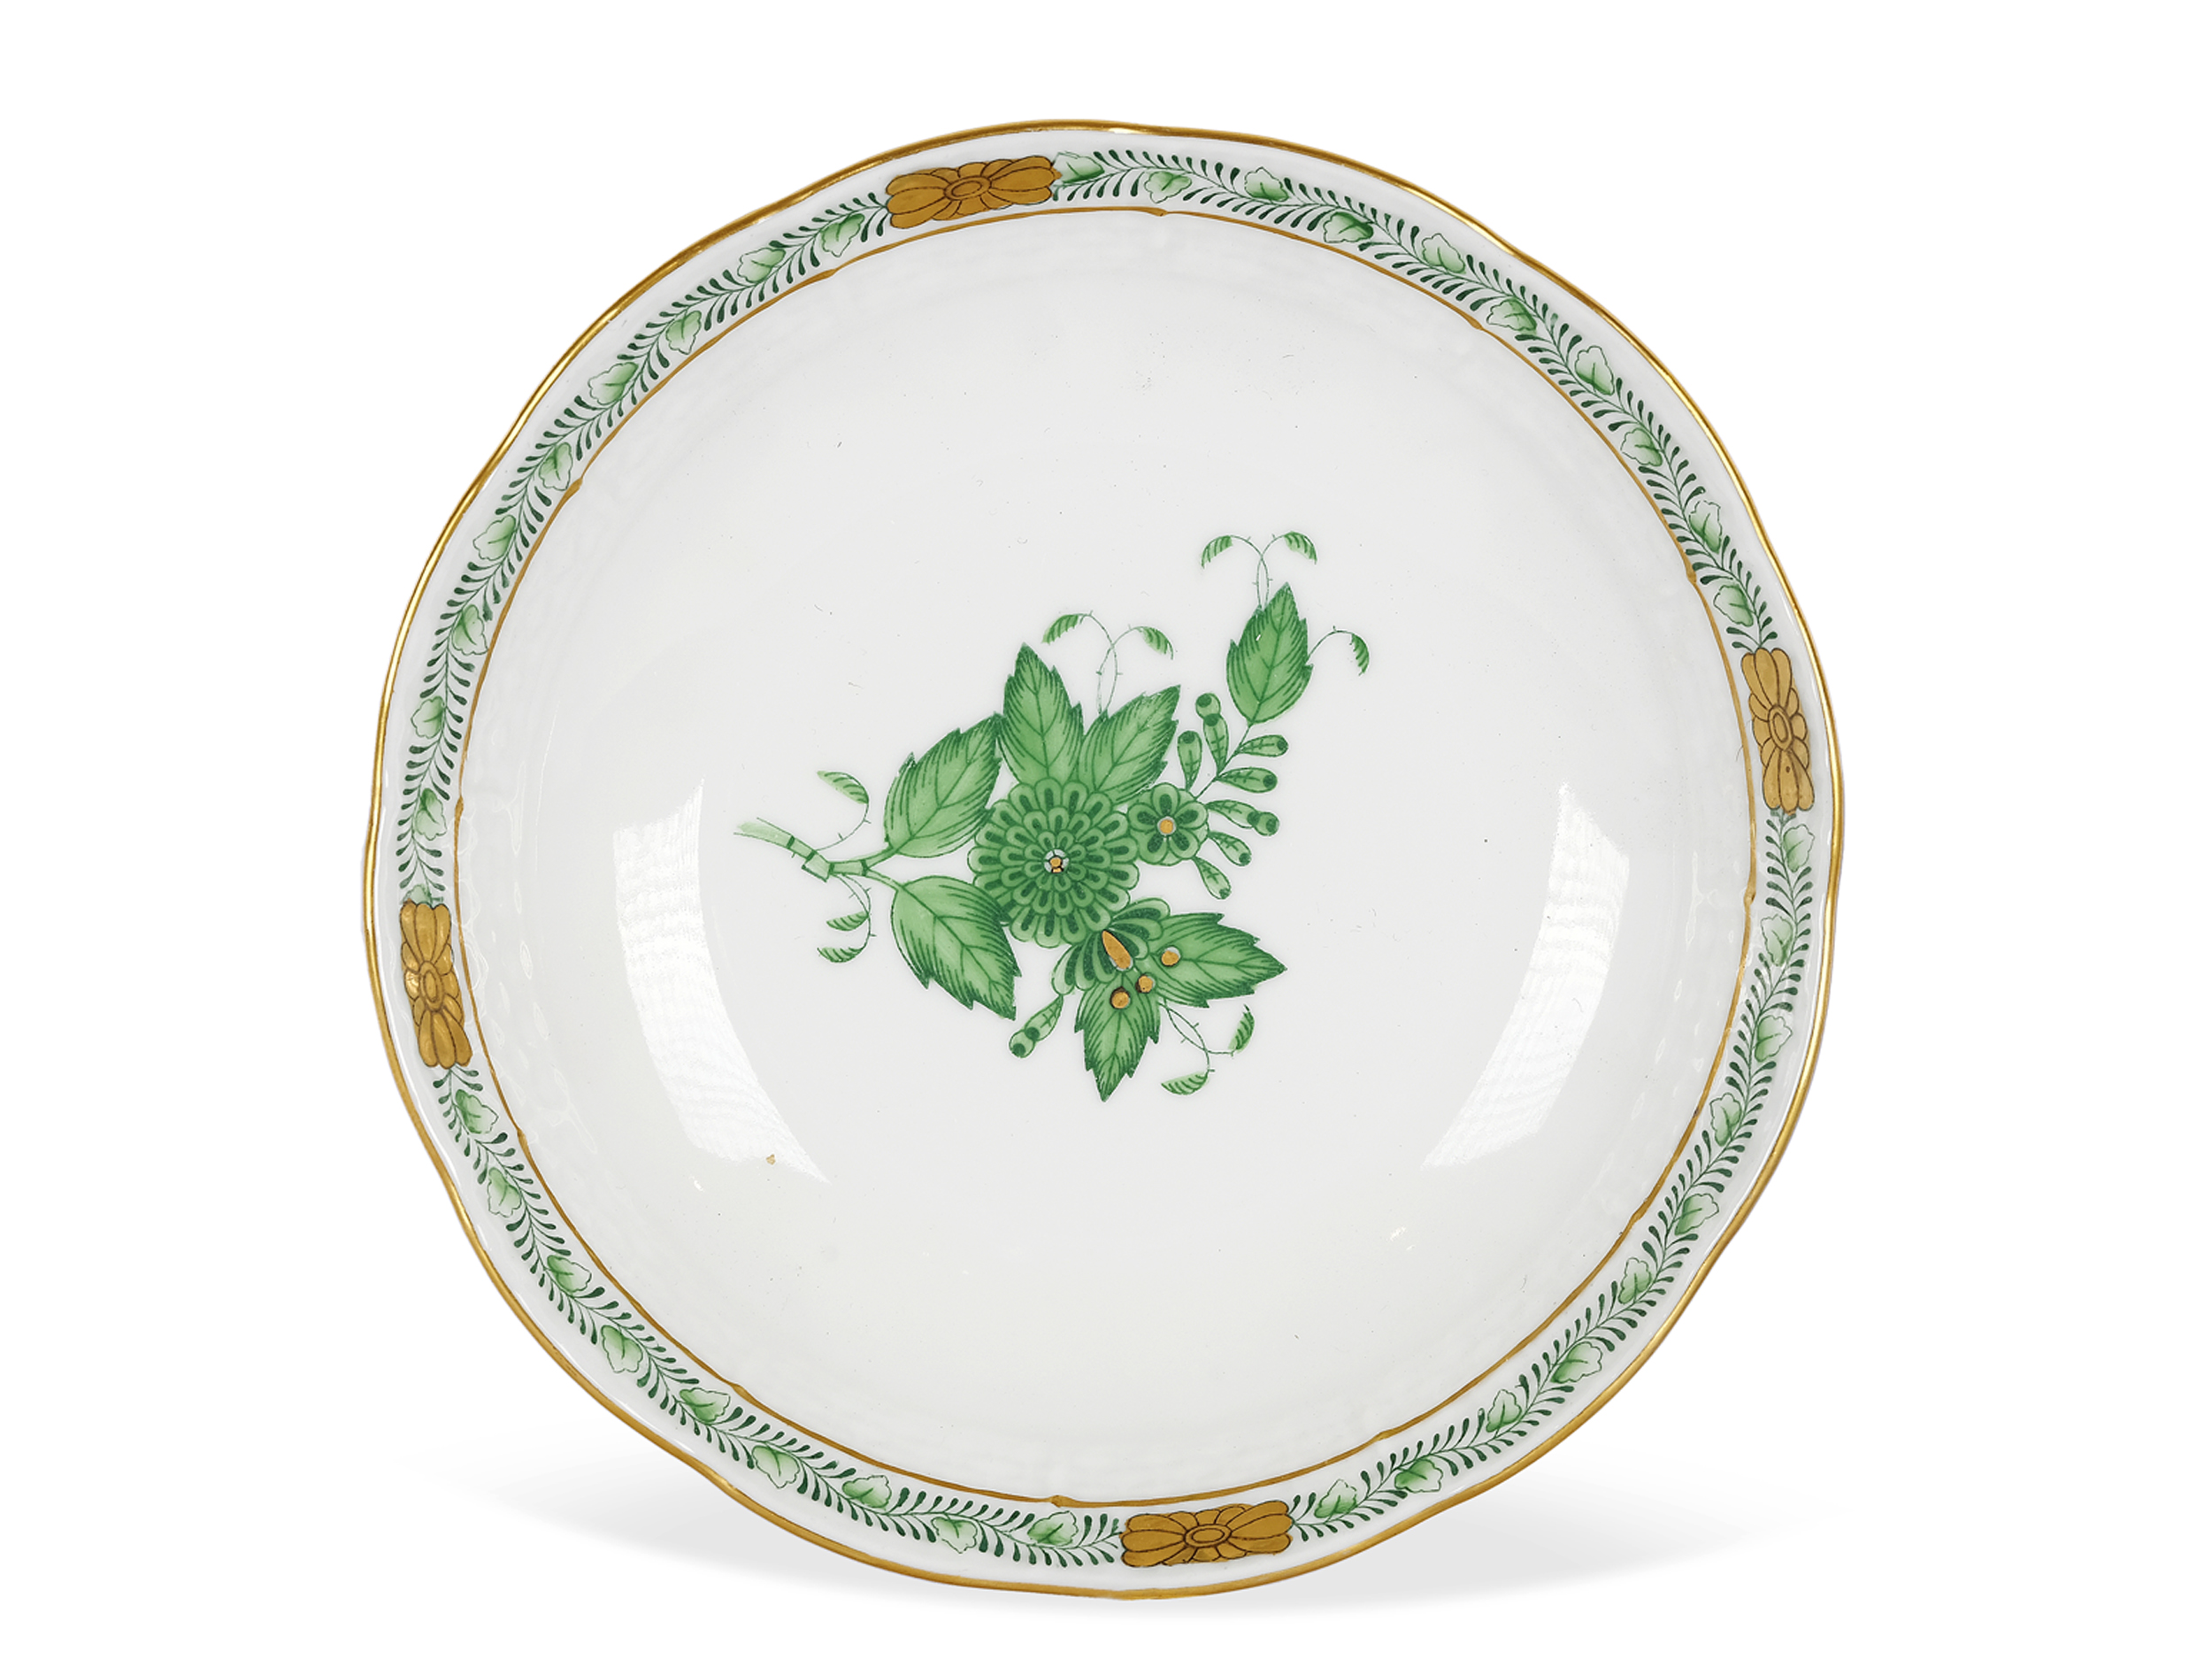 Large dinner service, 53 piece, Herend, Apponyi Vert - Image 5 of 6